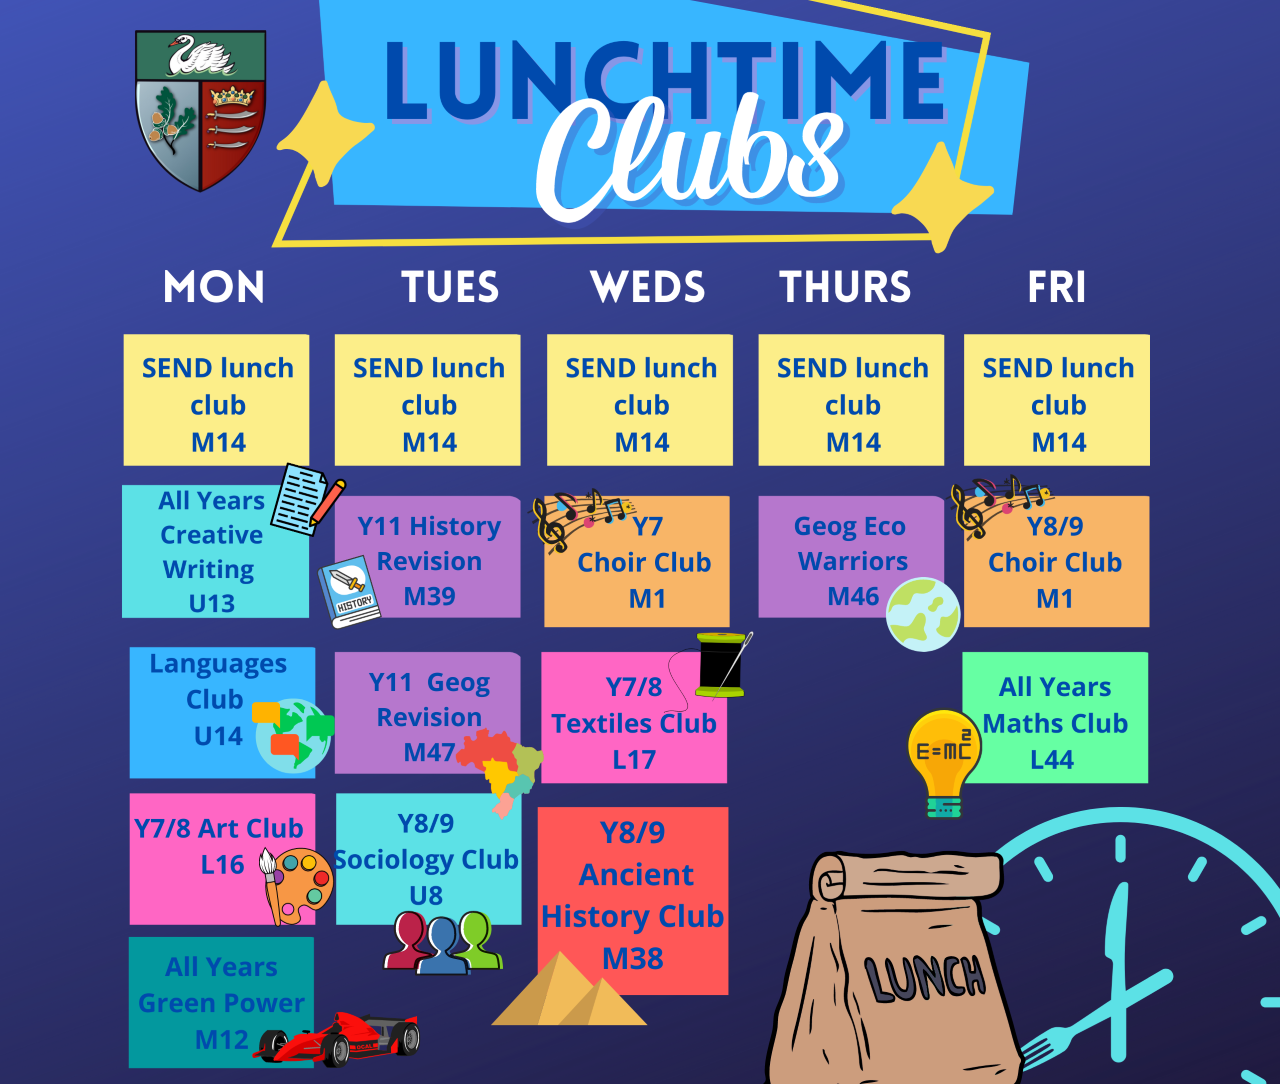 Lunchtime clubs Nov 21